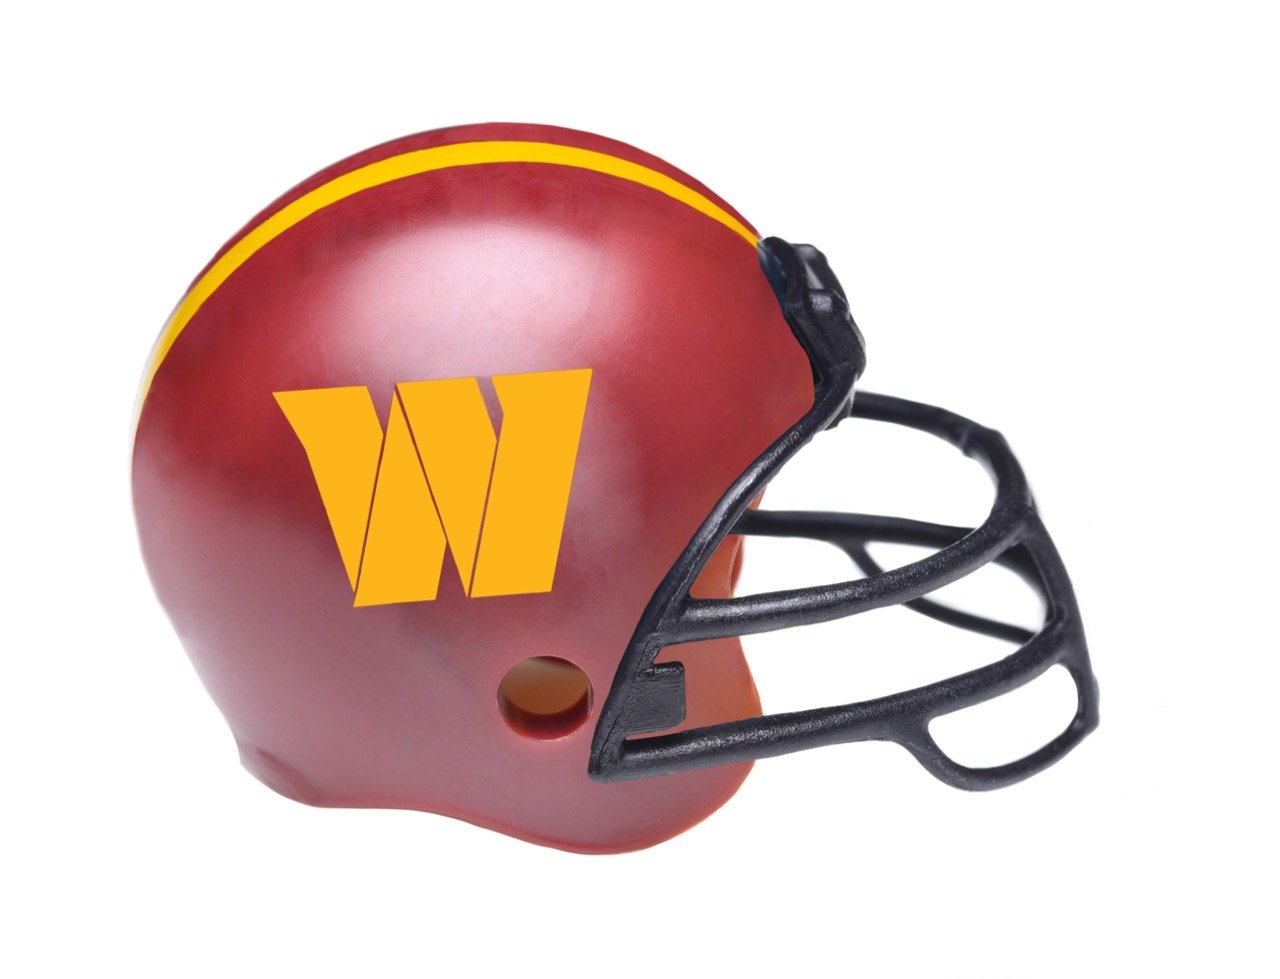 From Redskins to Commanders: The Football History of the Washington Football Team